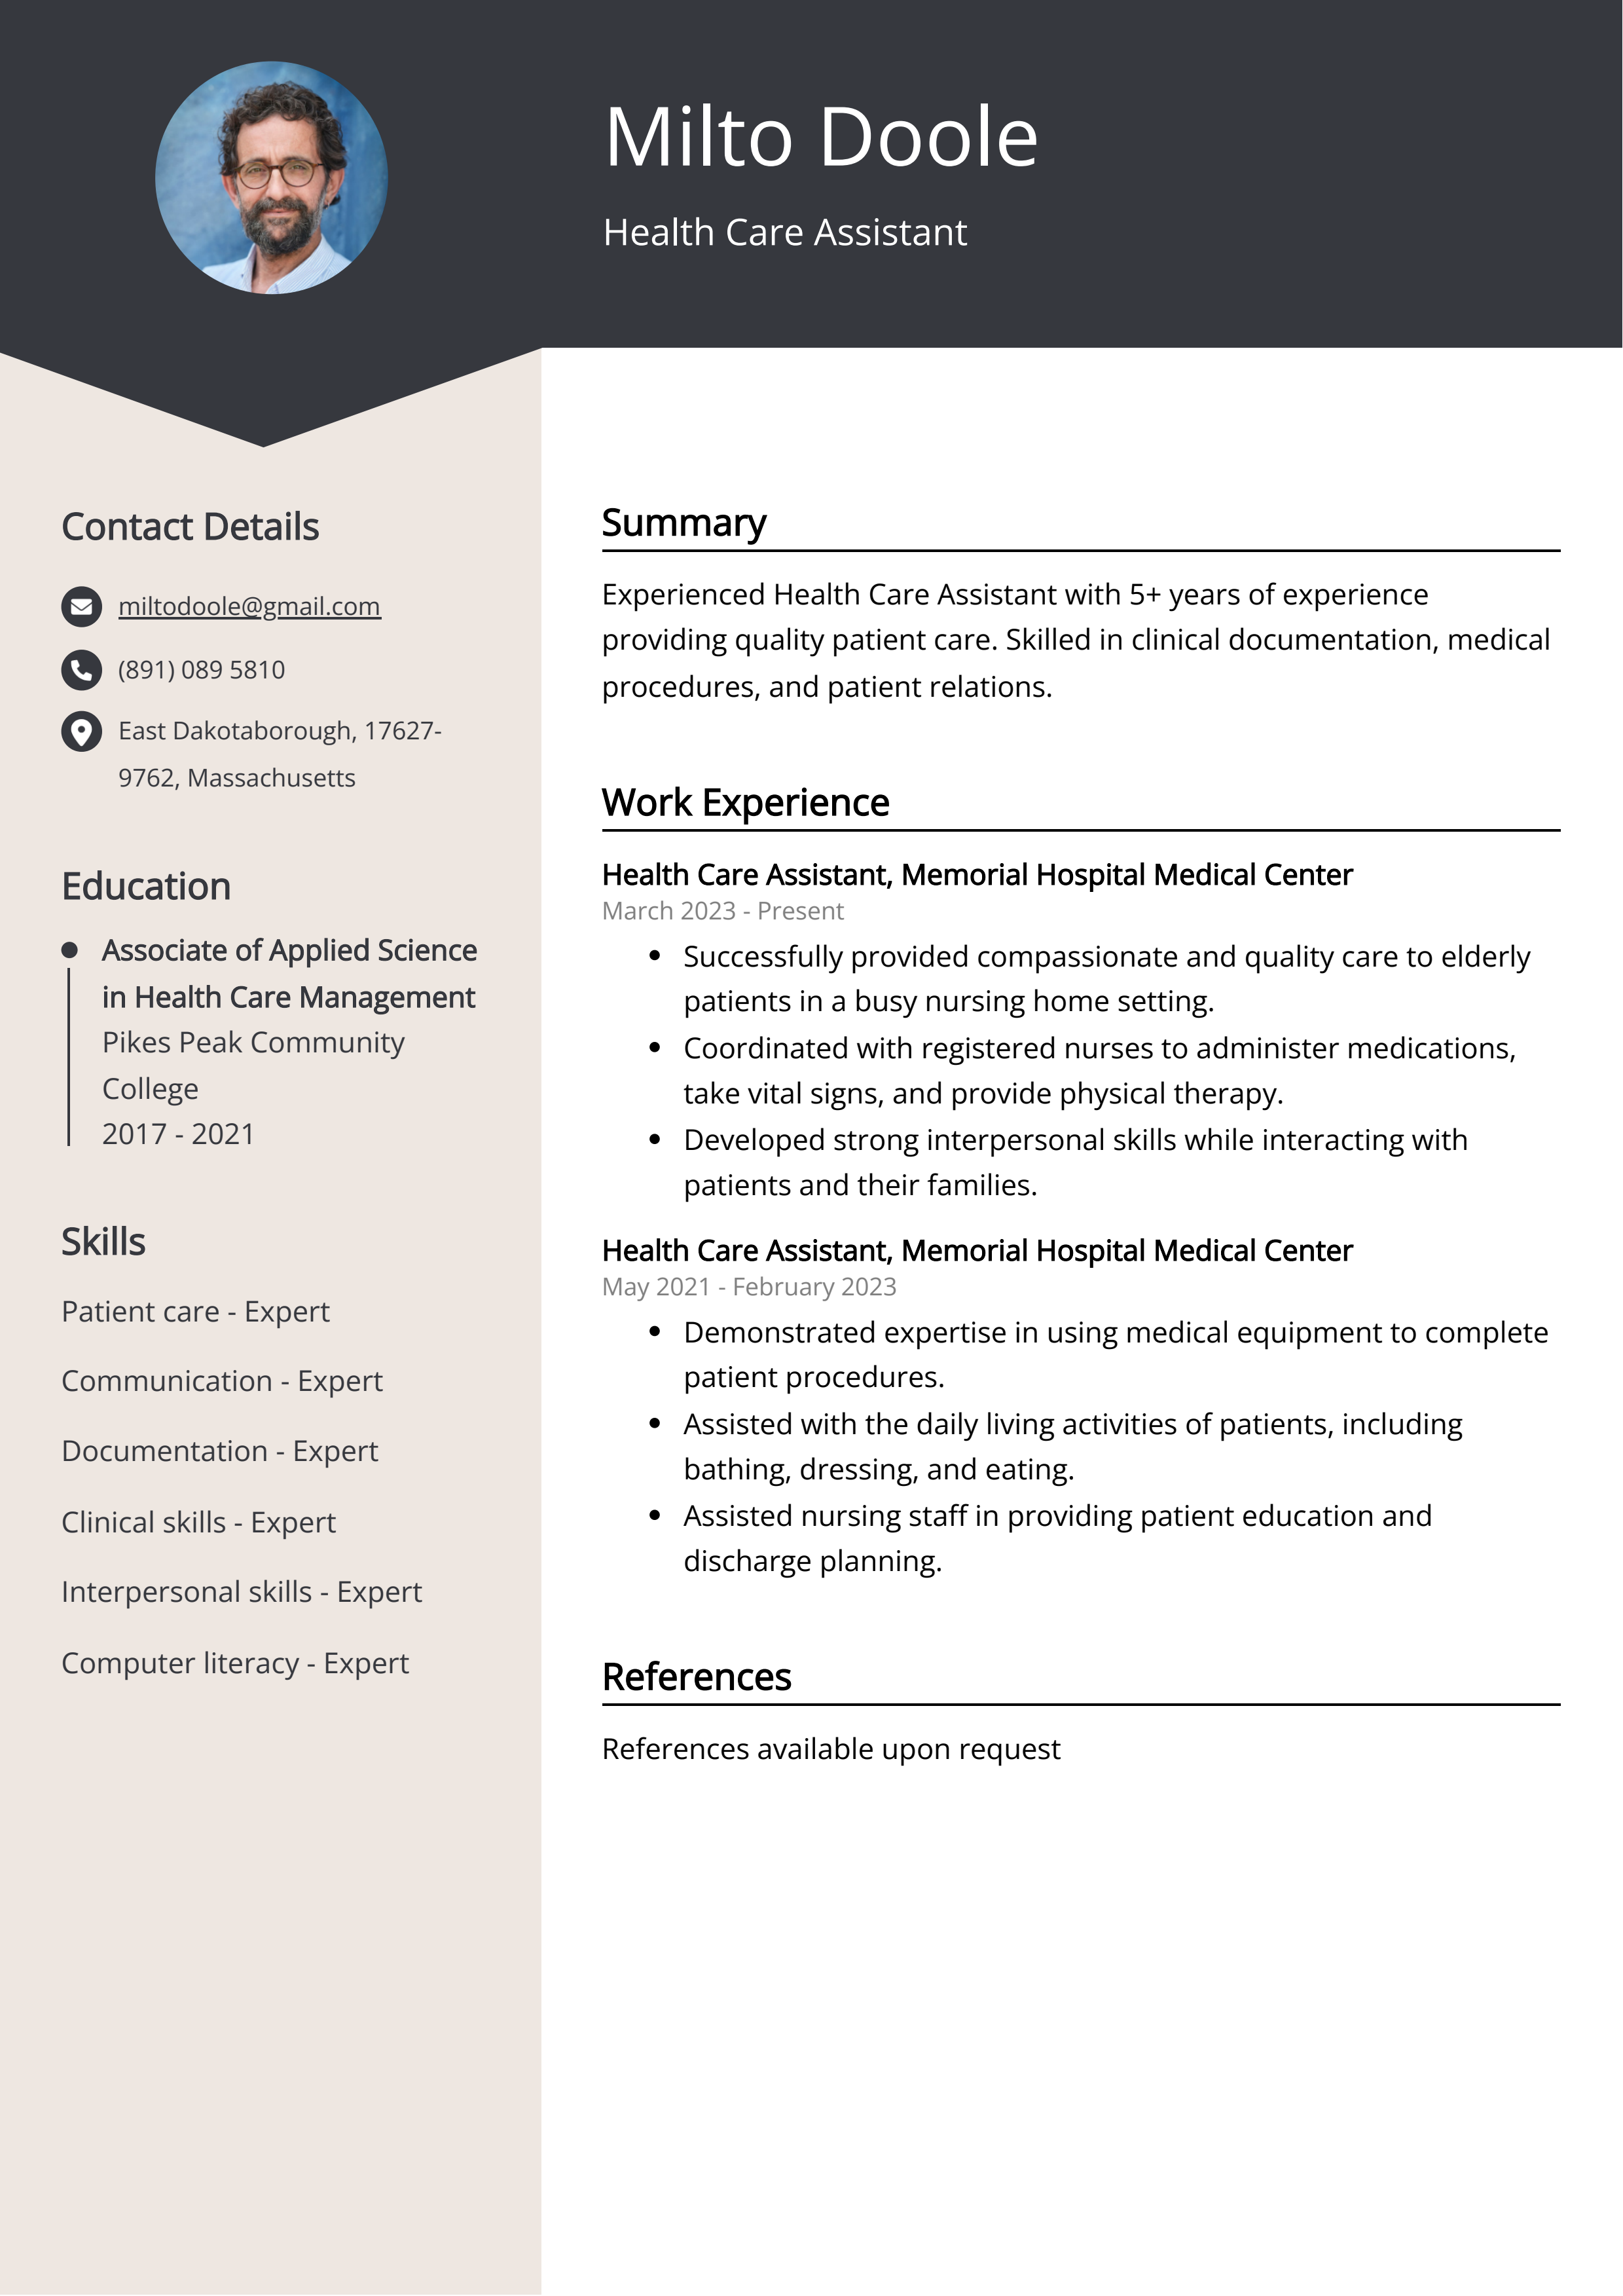 Health Care Assistant CV Example